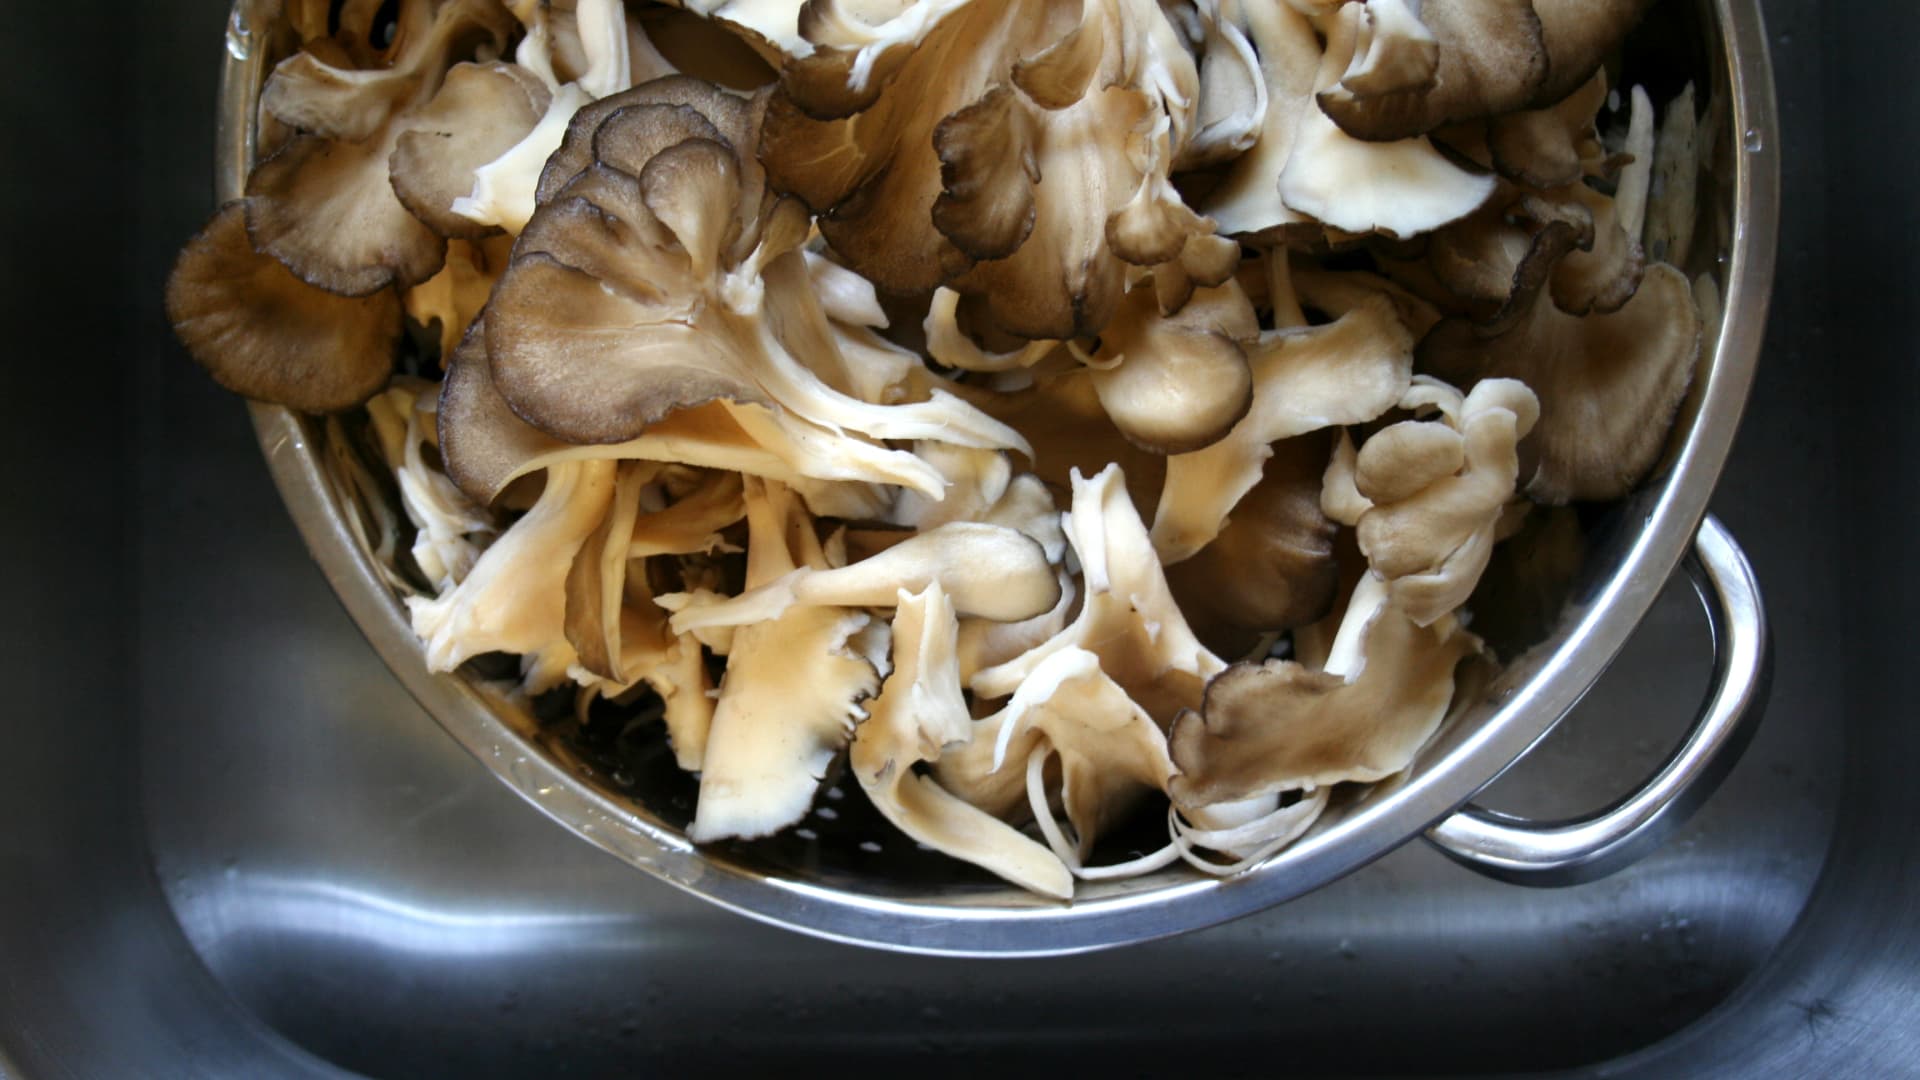 The maitake mushroom is an edible mushroom that grows at the base of trees and is known to have medicinal benefits.